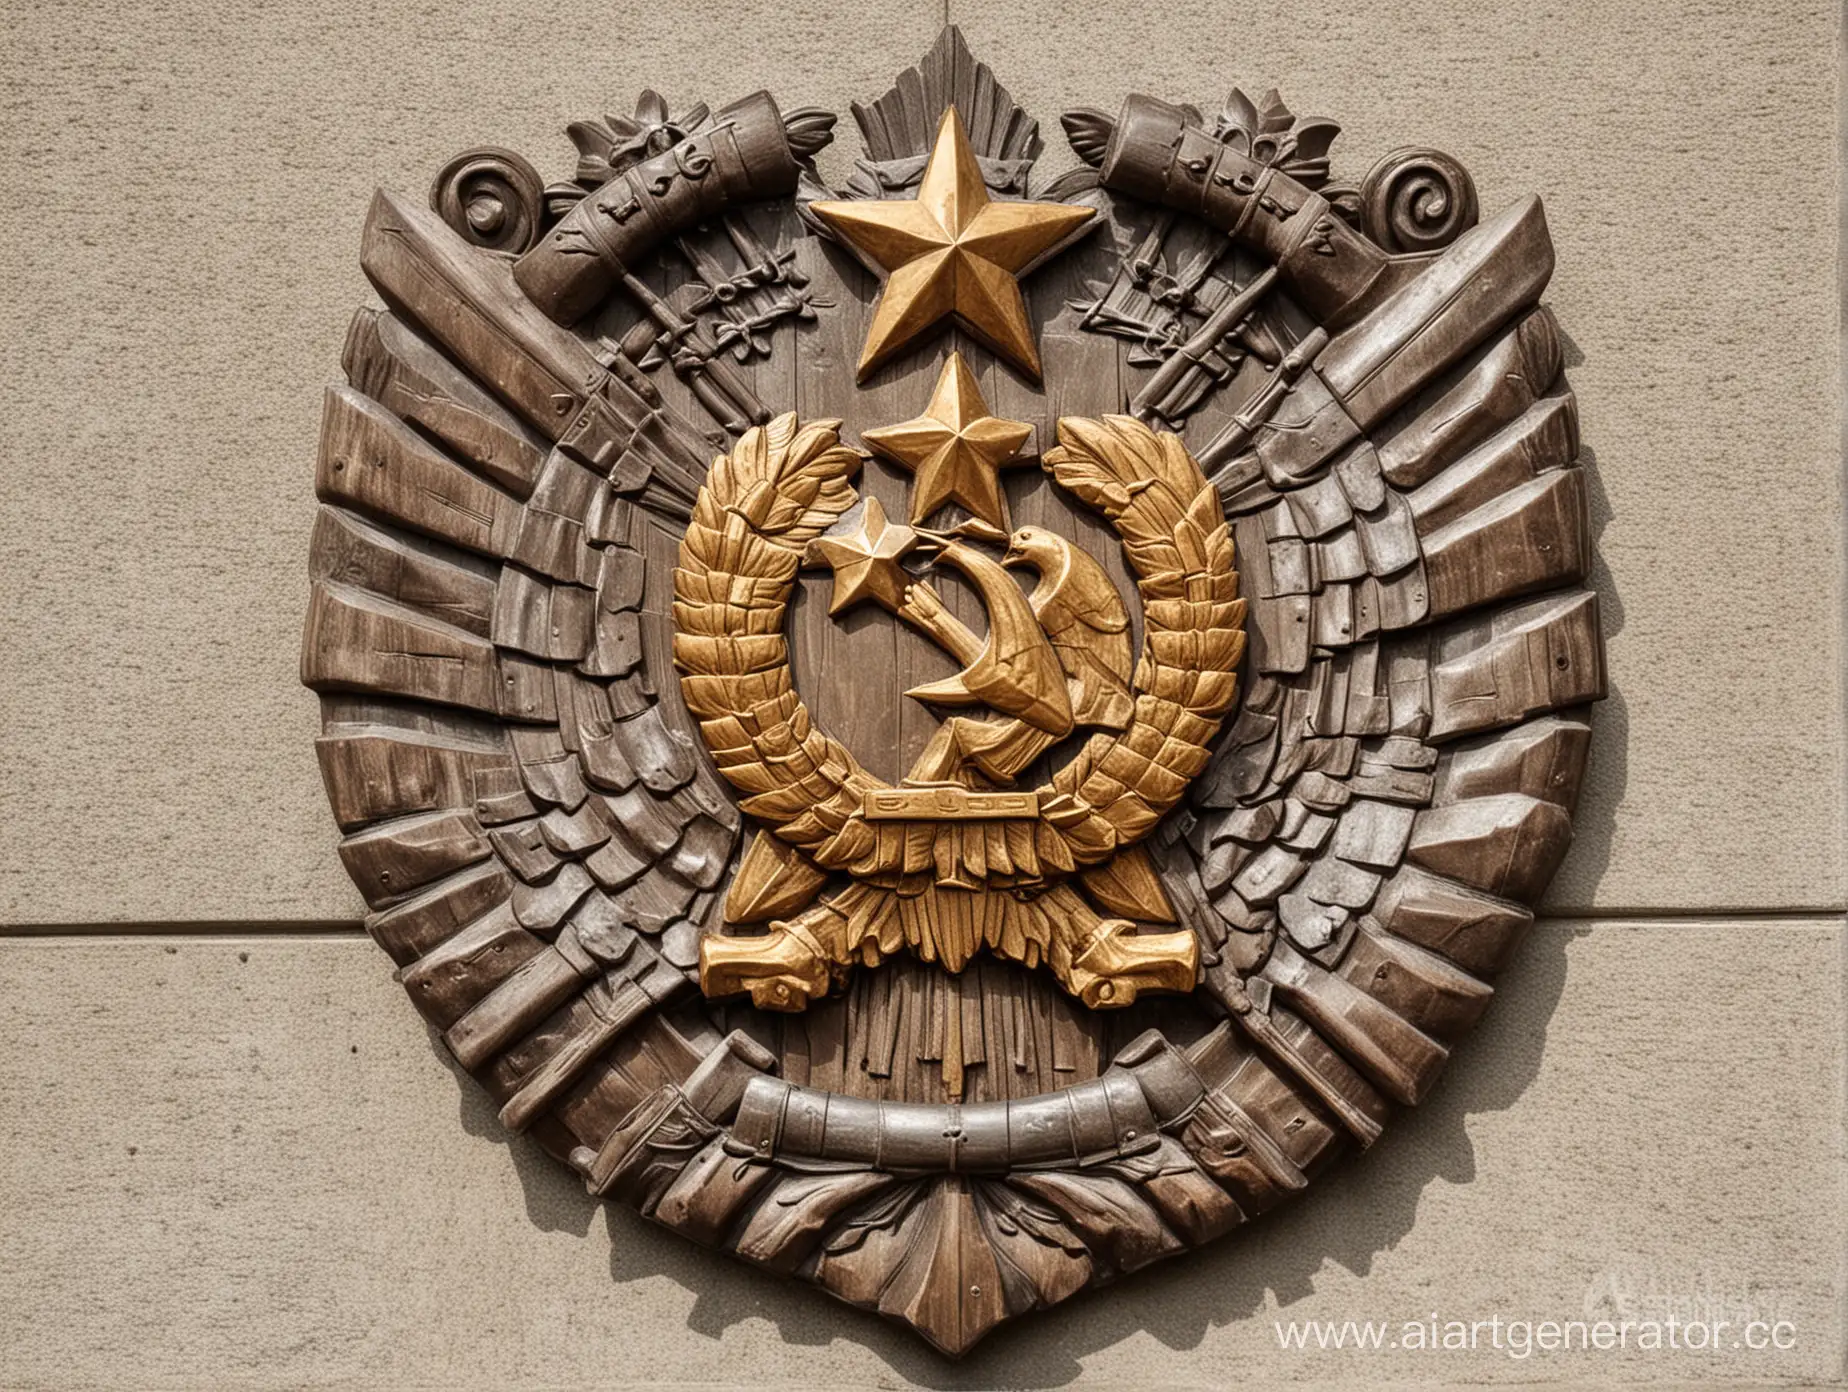 Symbolic-Coat-of-Arms-of-the-Soviet-Union-with-Hammer-and-Sickle